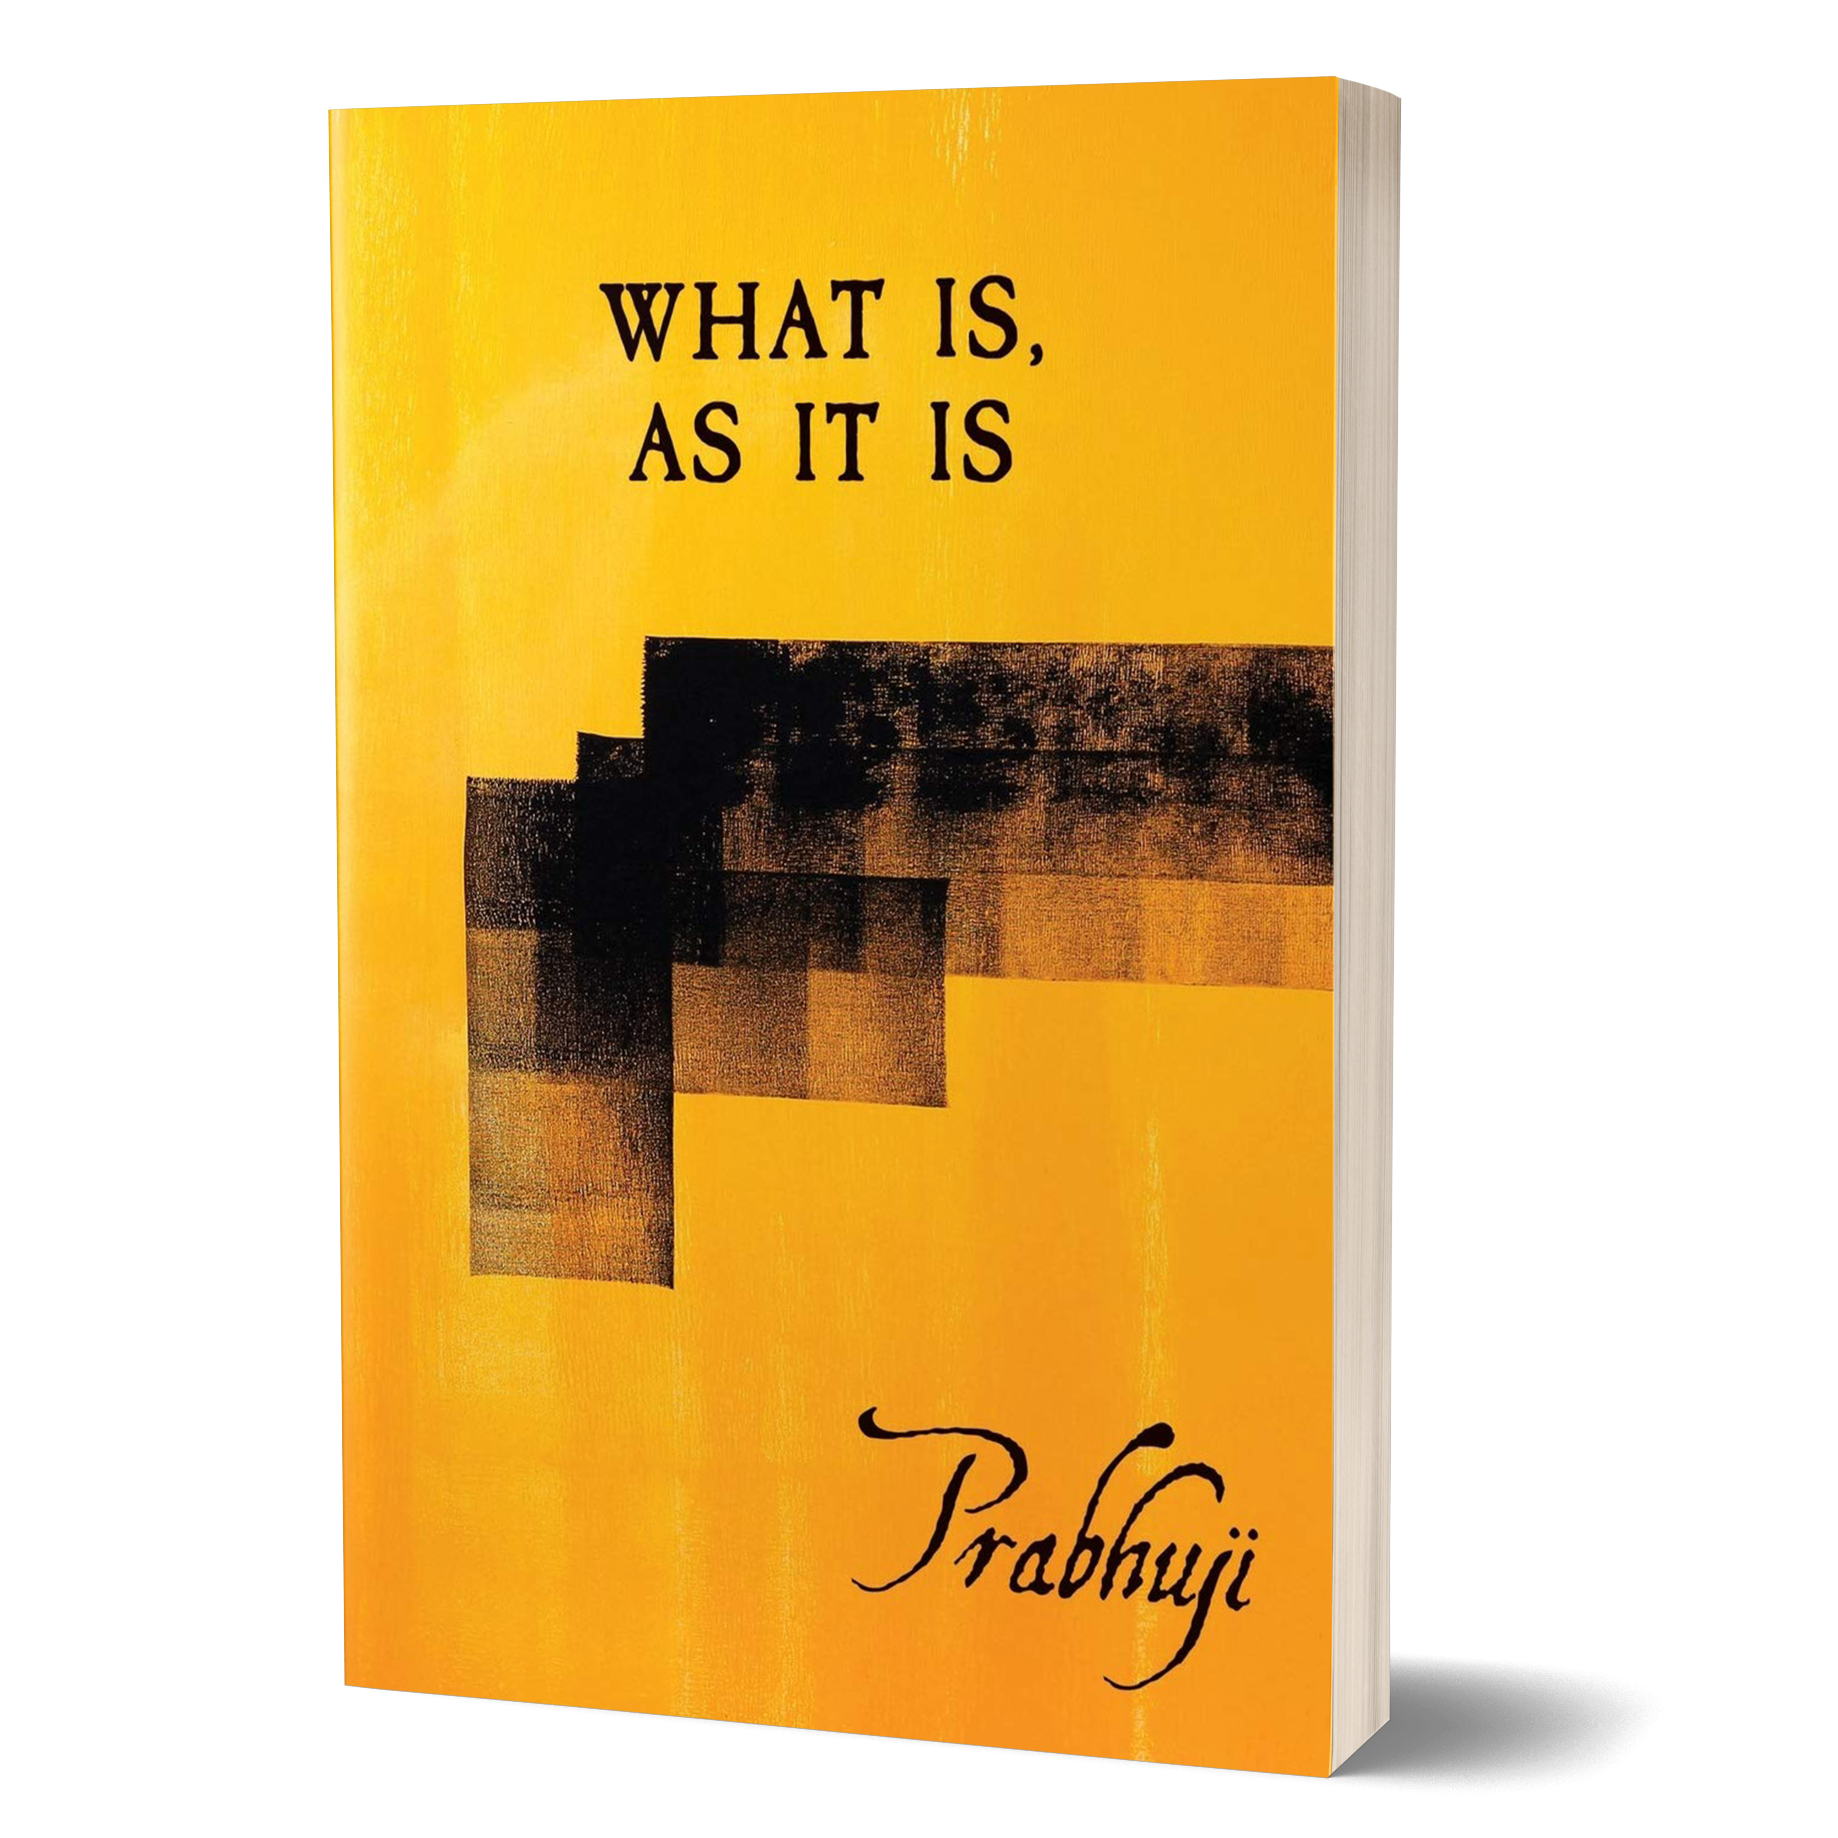 What is, as it is - Satsangs with Prabhuji (Paperback - English)